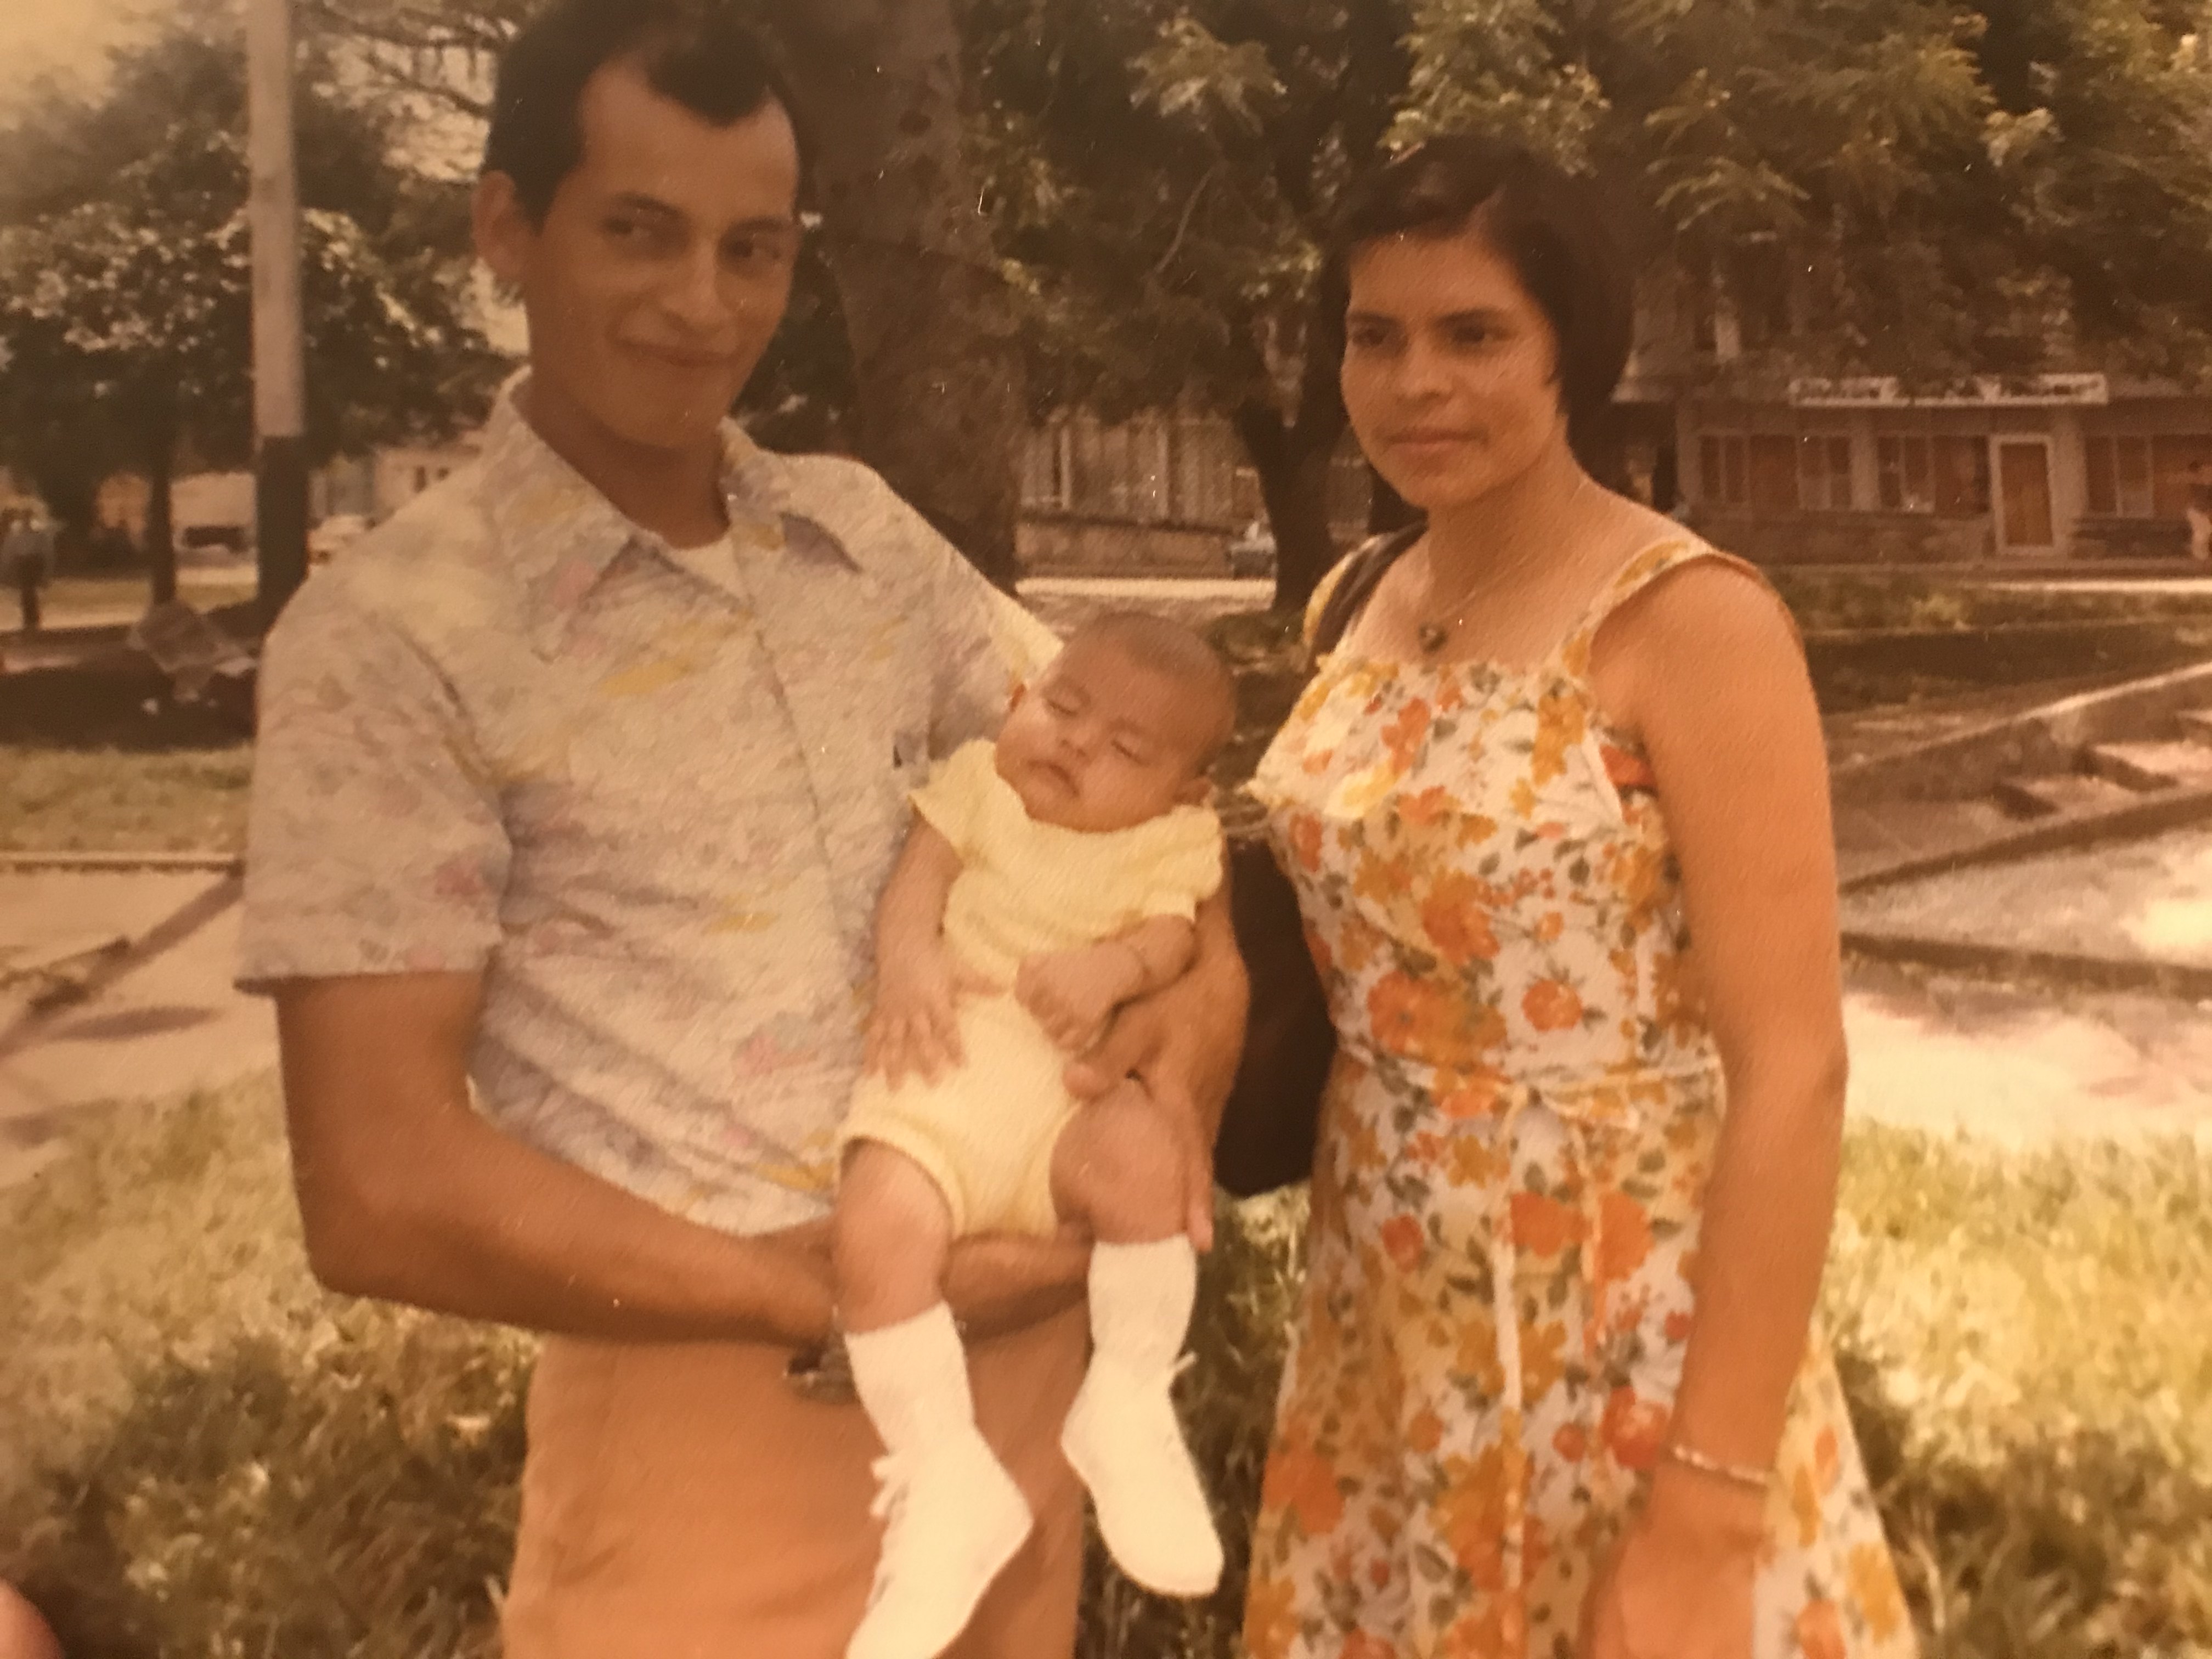 Carlos as a baby with his parents